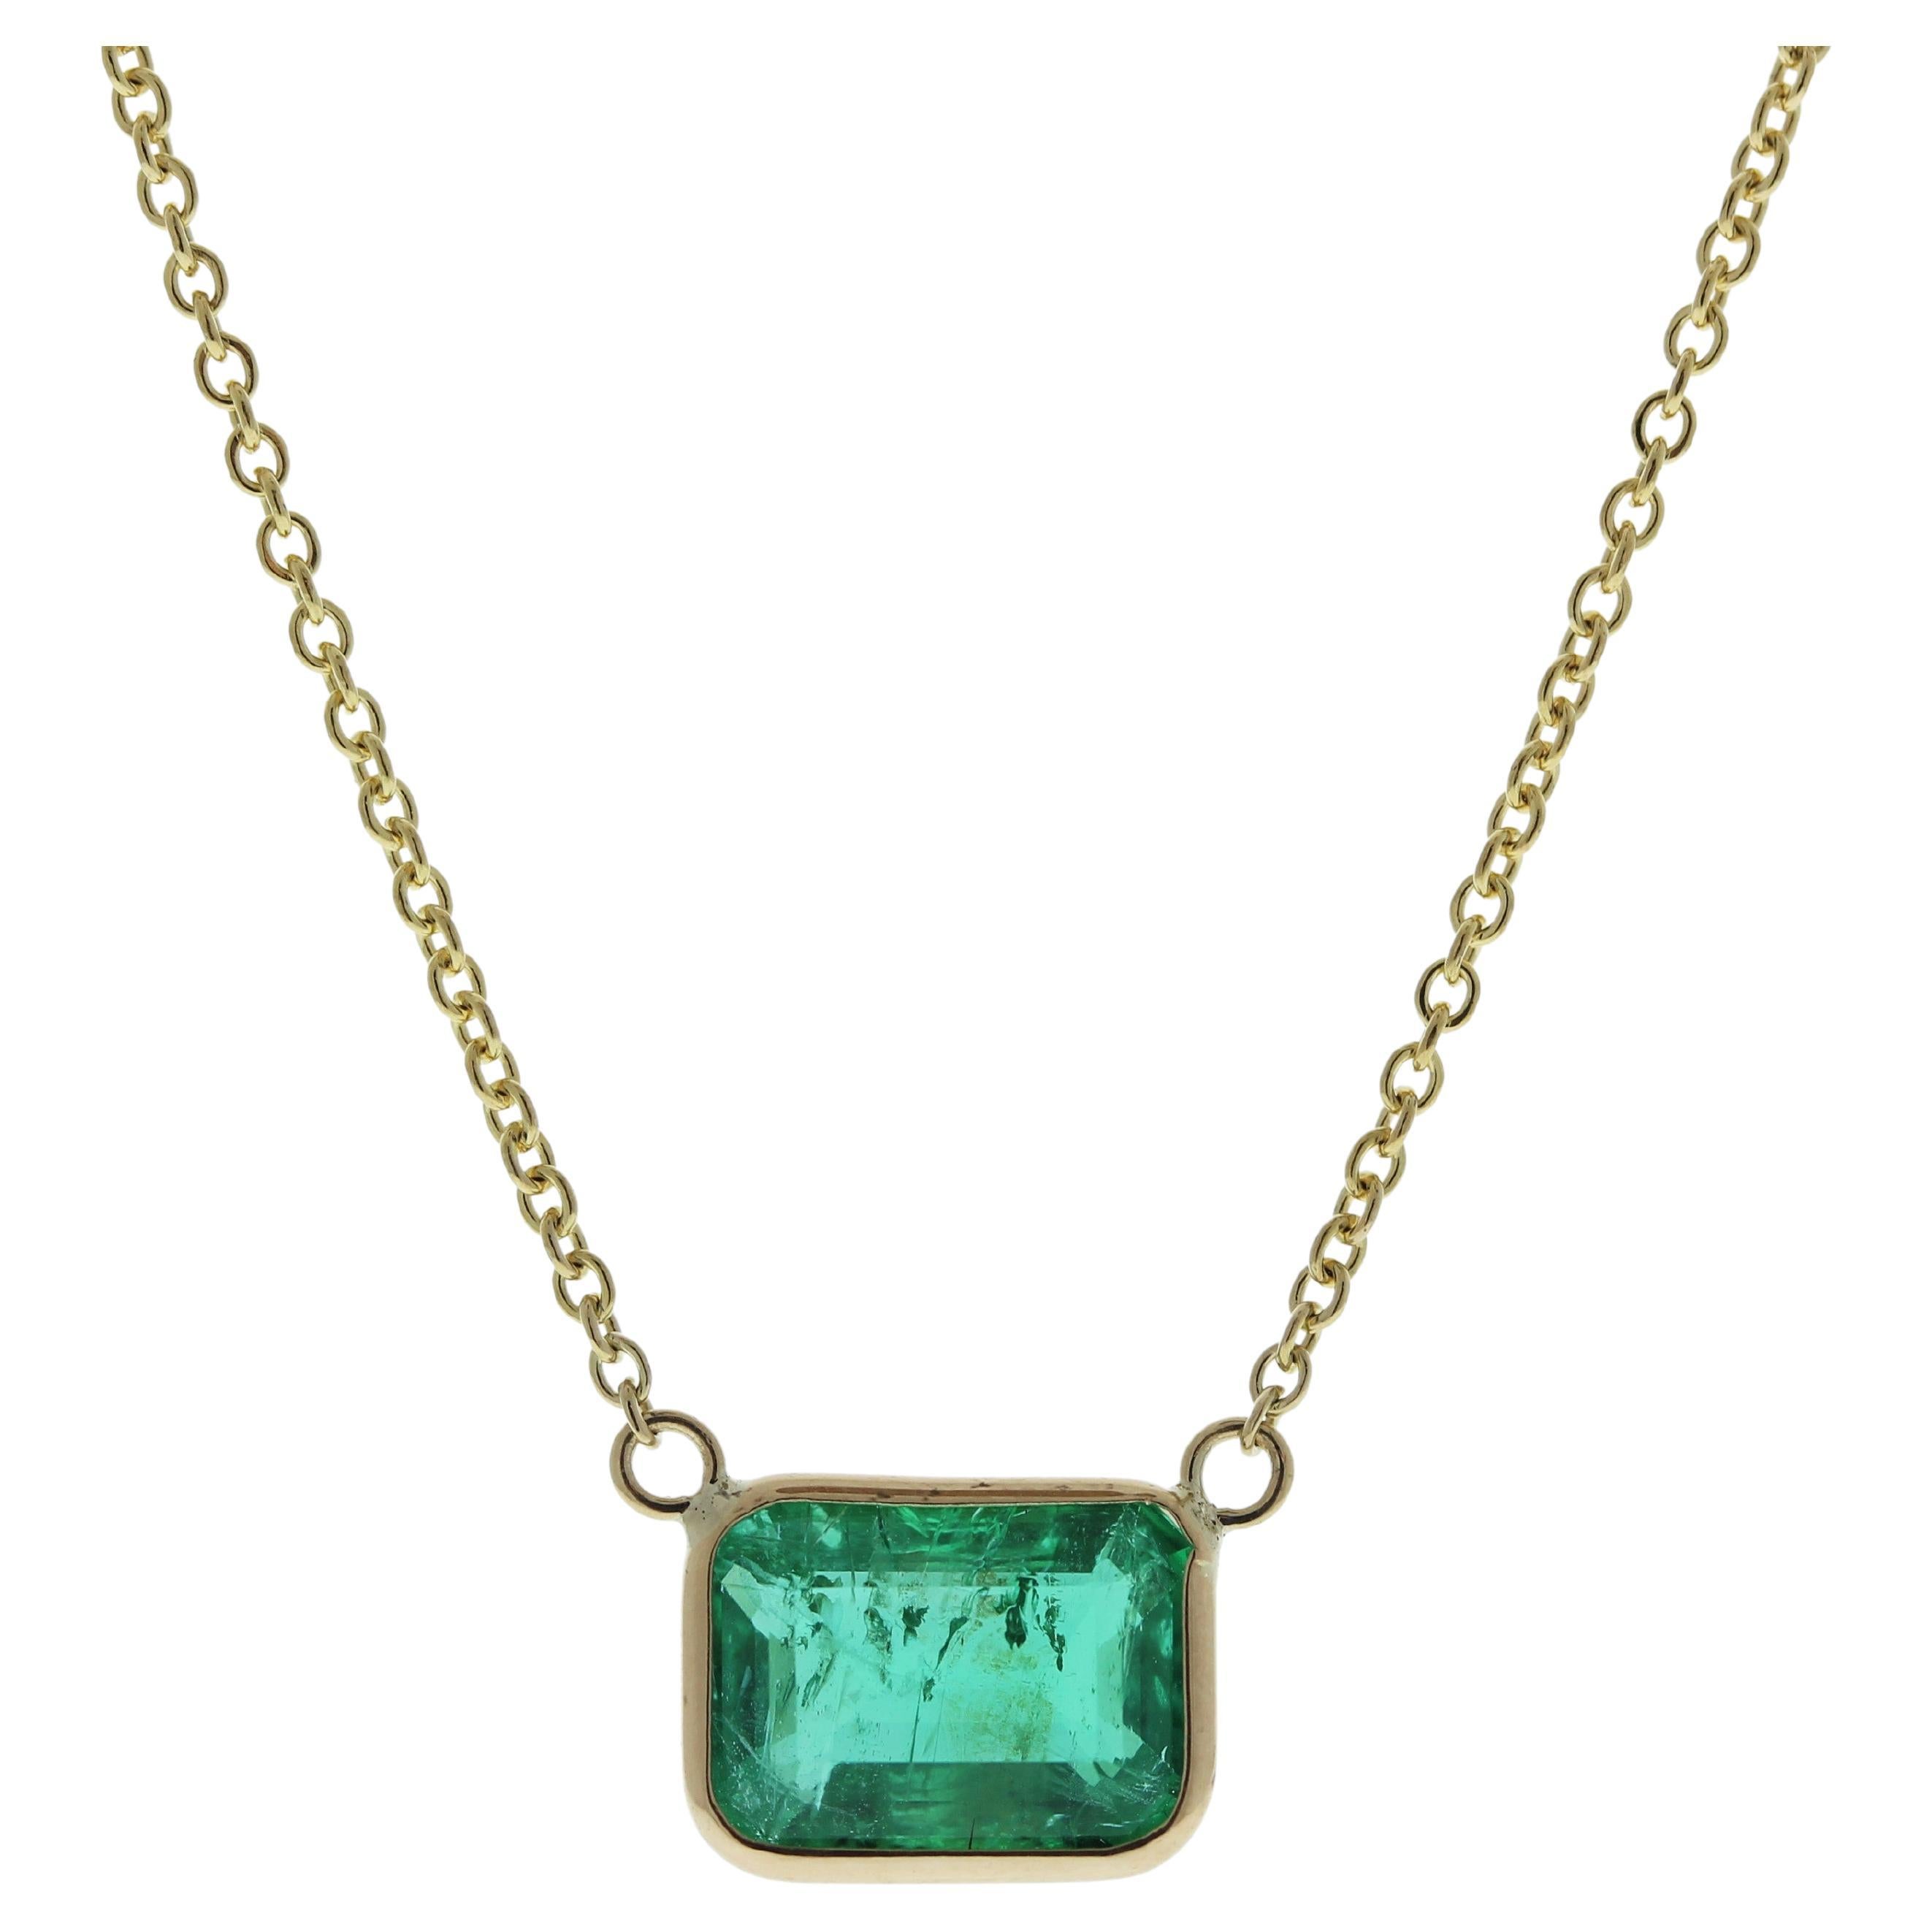 1.75 Carat Emerald Green Fashion Necklaces In 14k Yellow Gold